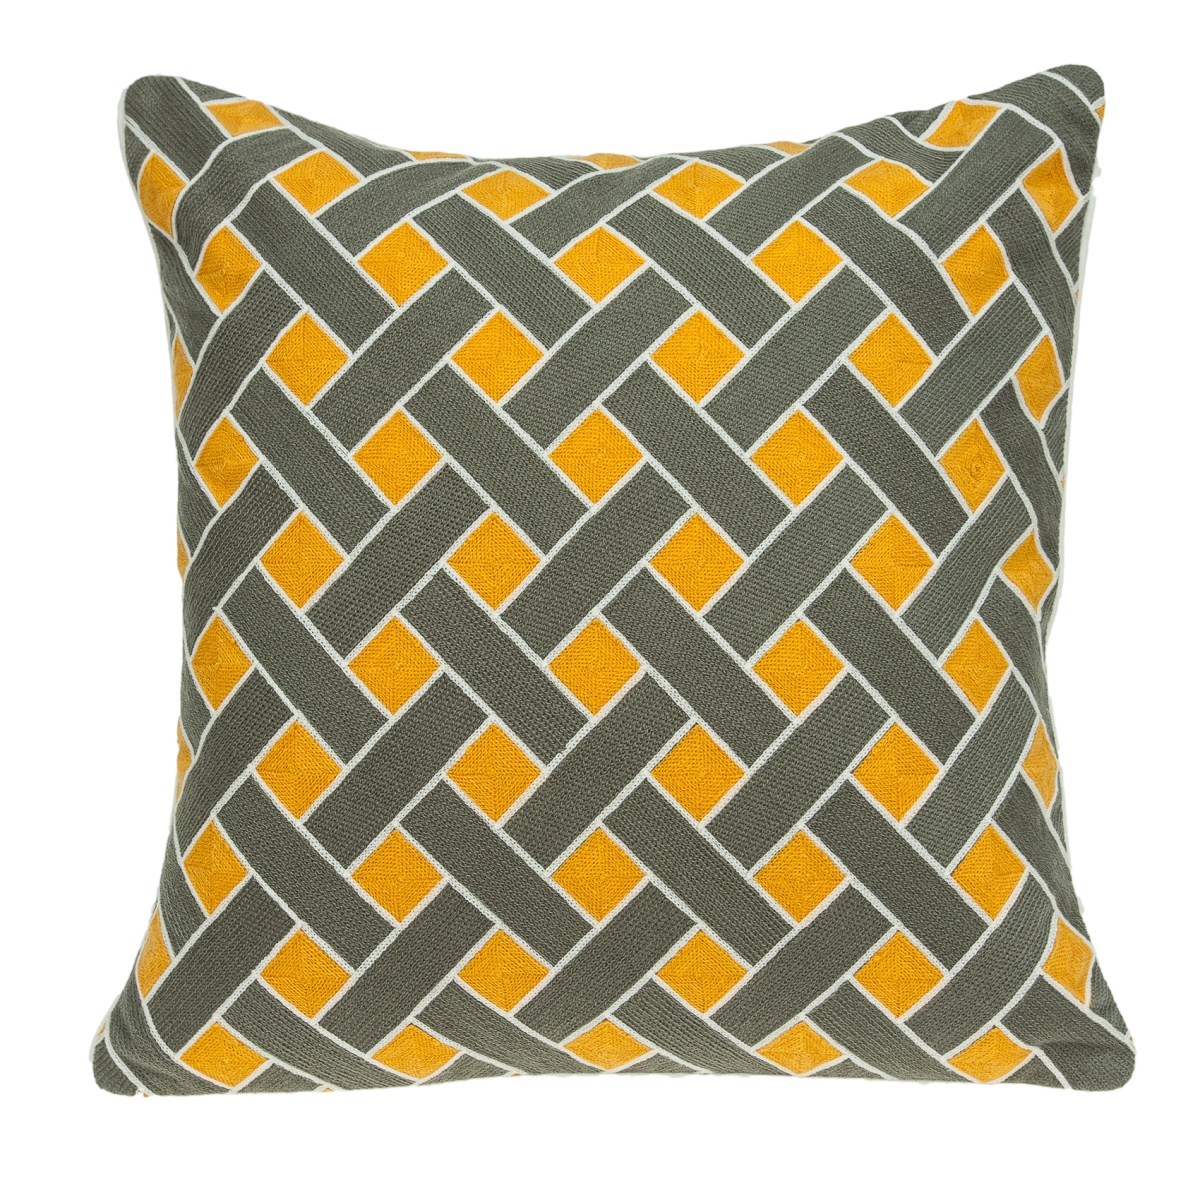 Pila11004d Kain Grey, Orange & White Square Transitional Pillow Cover With Down Insert - 20 X 20 X 7 In.